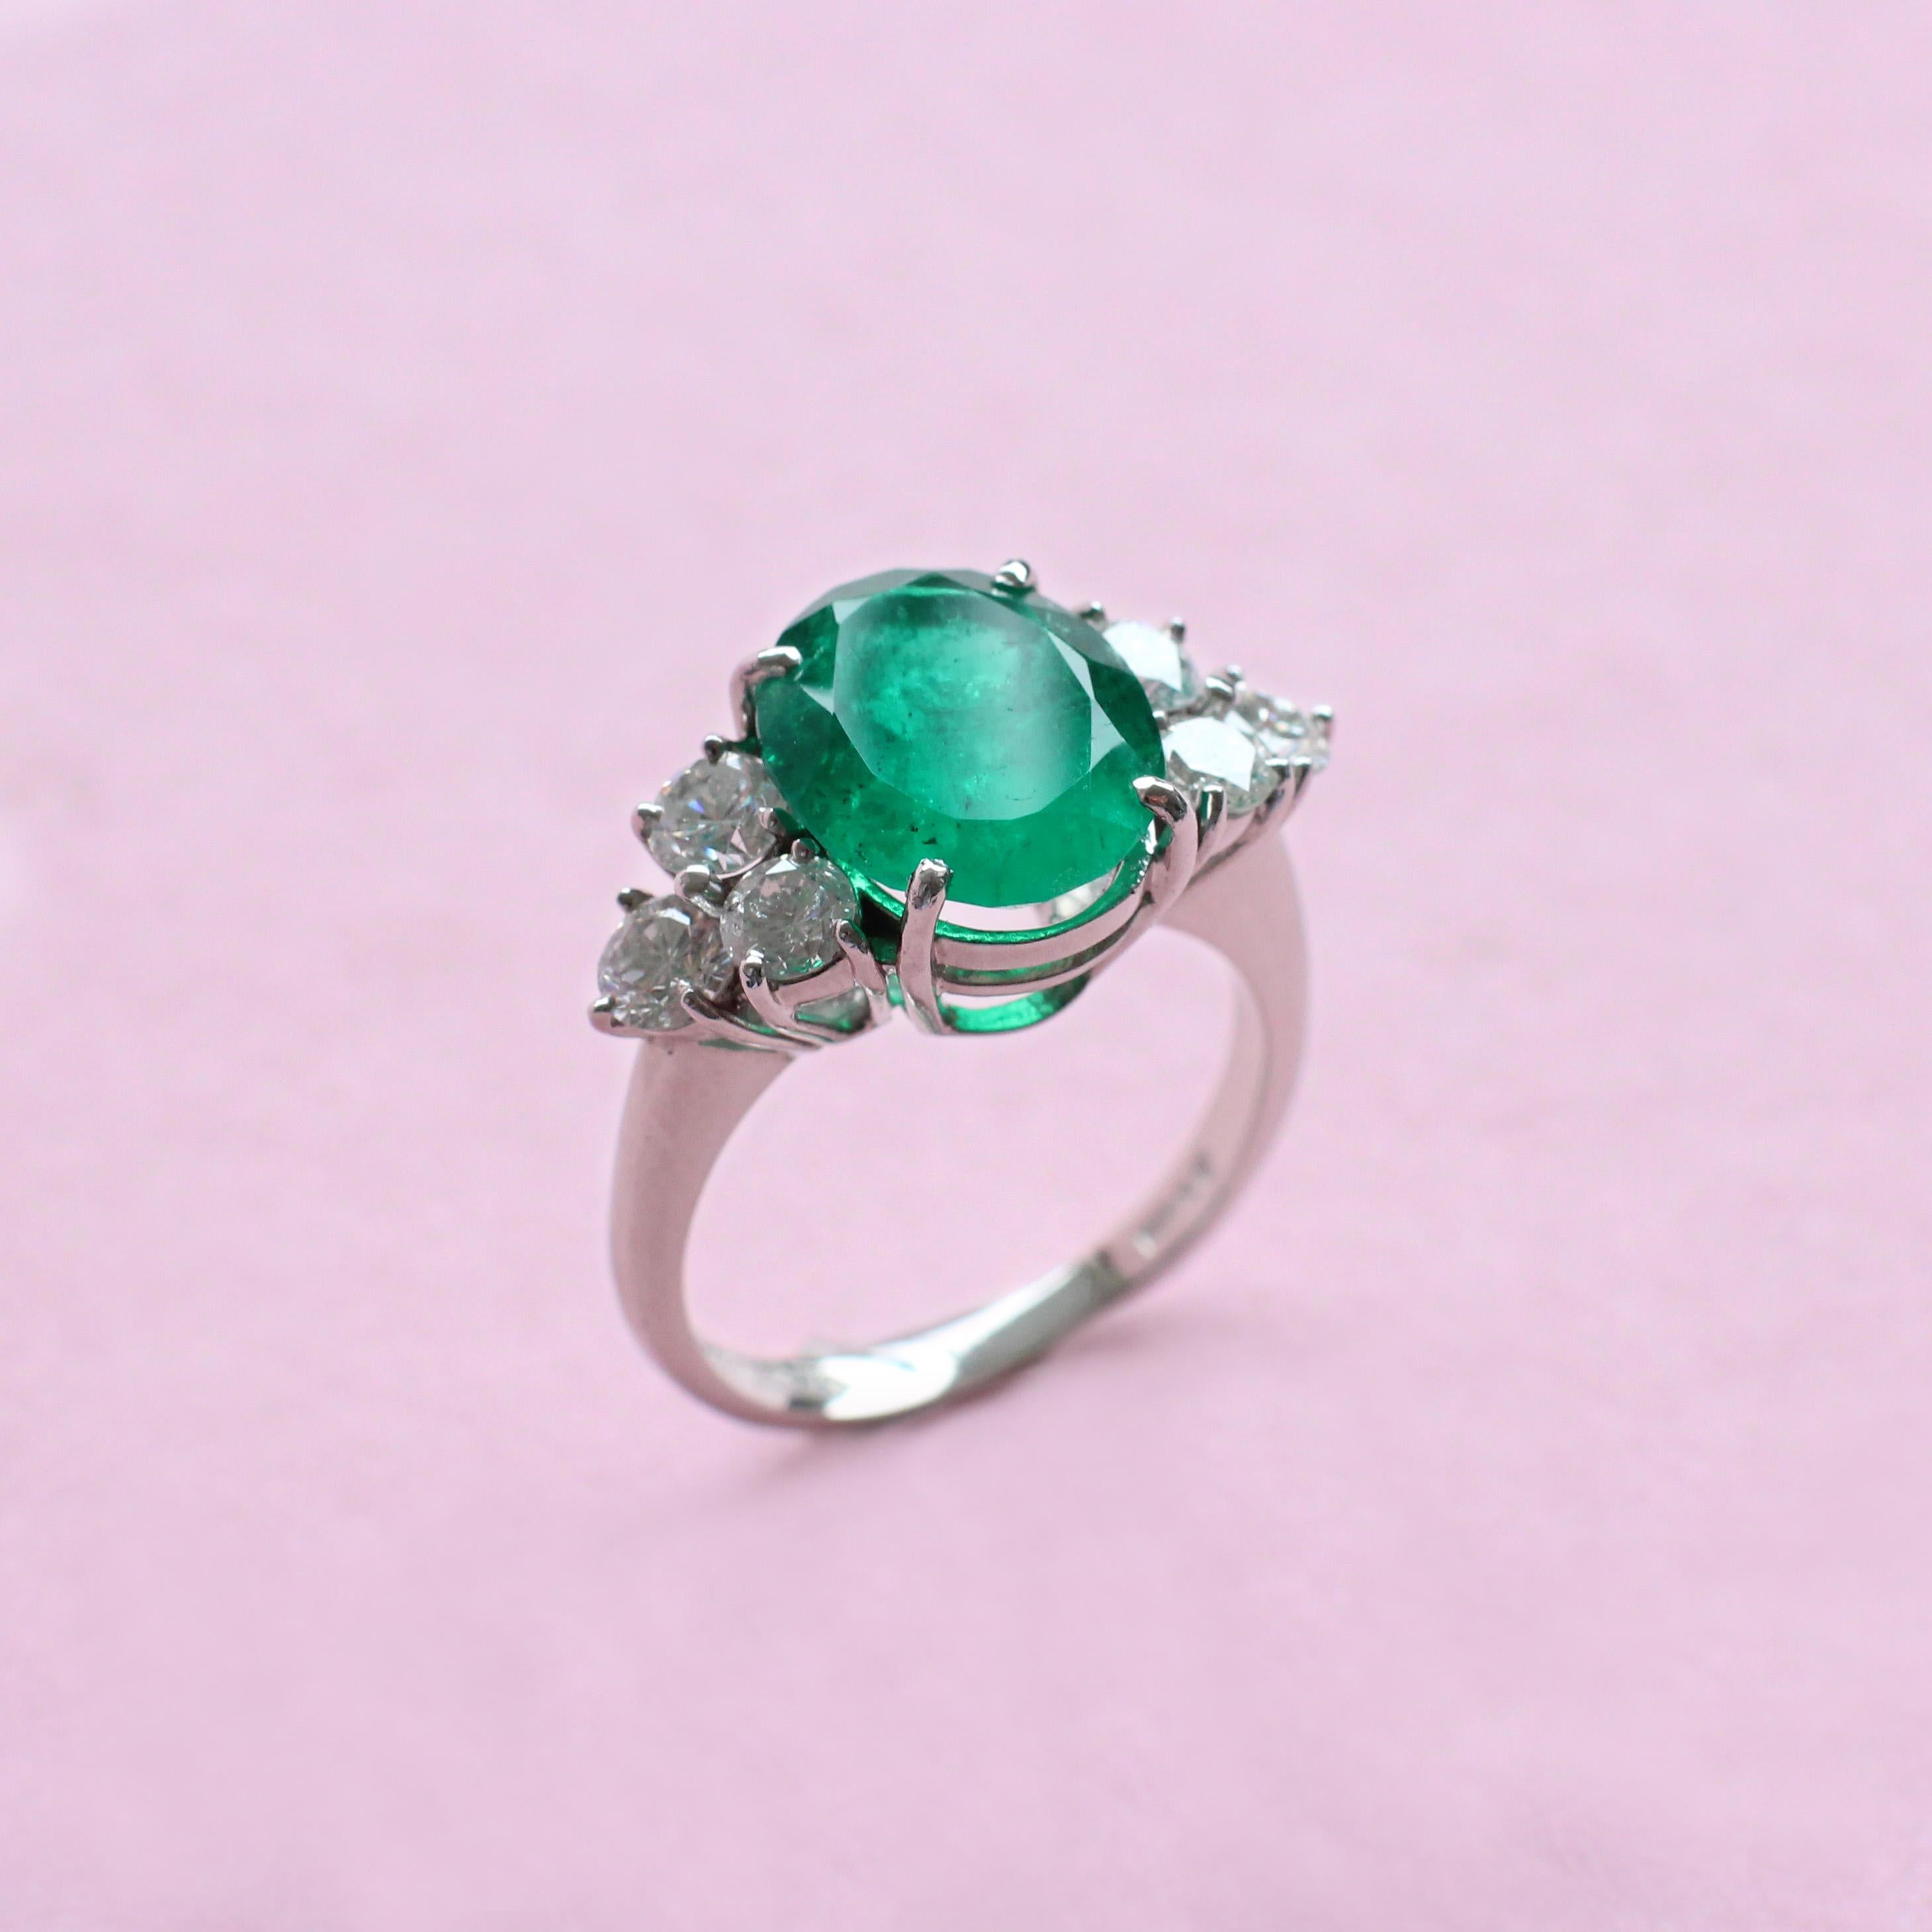 A deep green emerald truly is the star of the show in this pretty white gold ring, crafted with care by the Haruni family. The bold colour of the main stone is showcased by its simple but striking oval shape, as well as the trio of glittering white